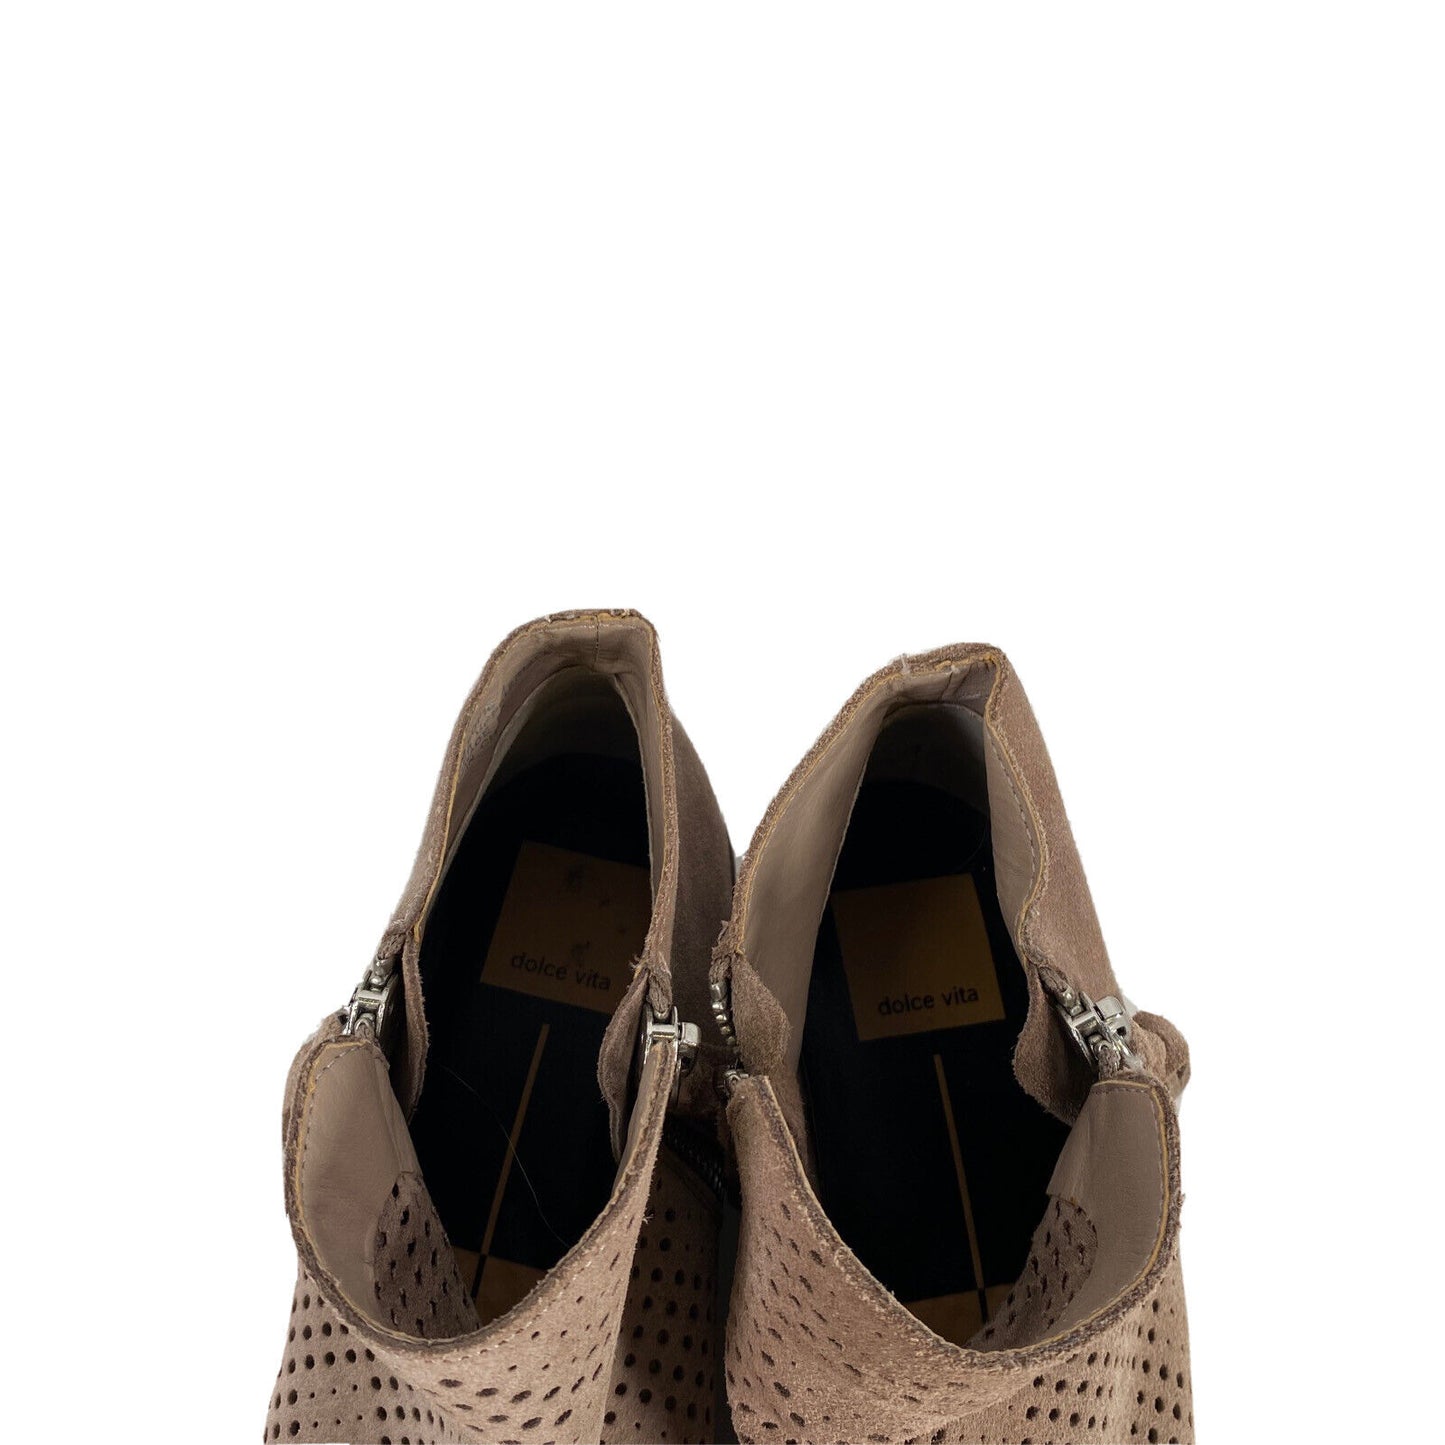 Dolce Vita Women's Beige Suede Perforated Side Zip Ankle Booties - 8.5